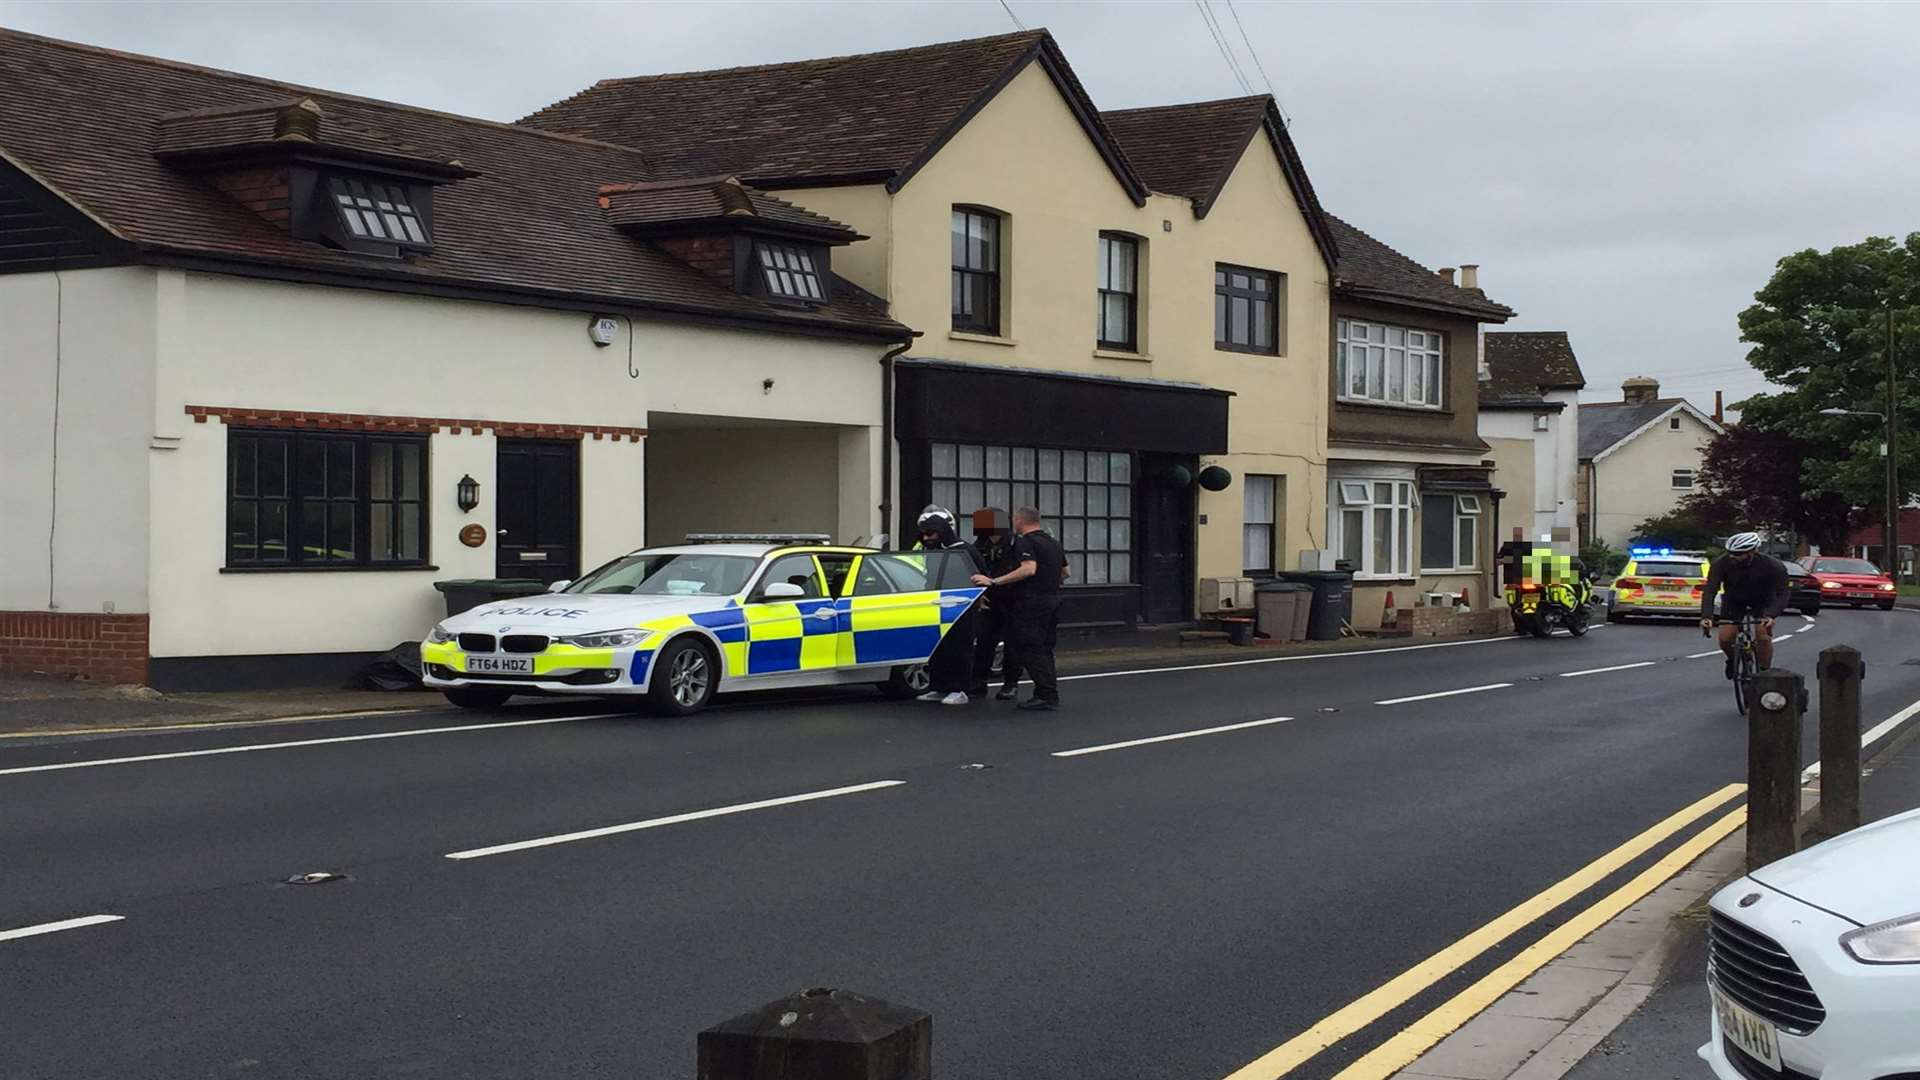 The scene at Wrotham Road, Meopham Green. We have blurred the suspect's face for legal reasons